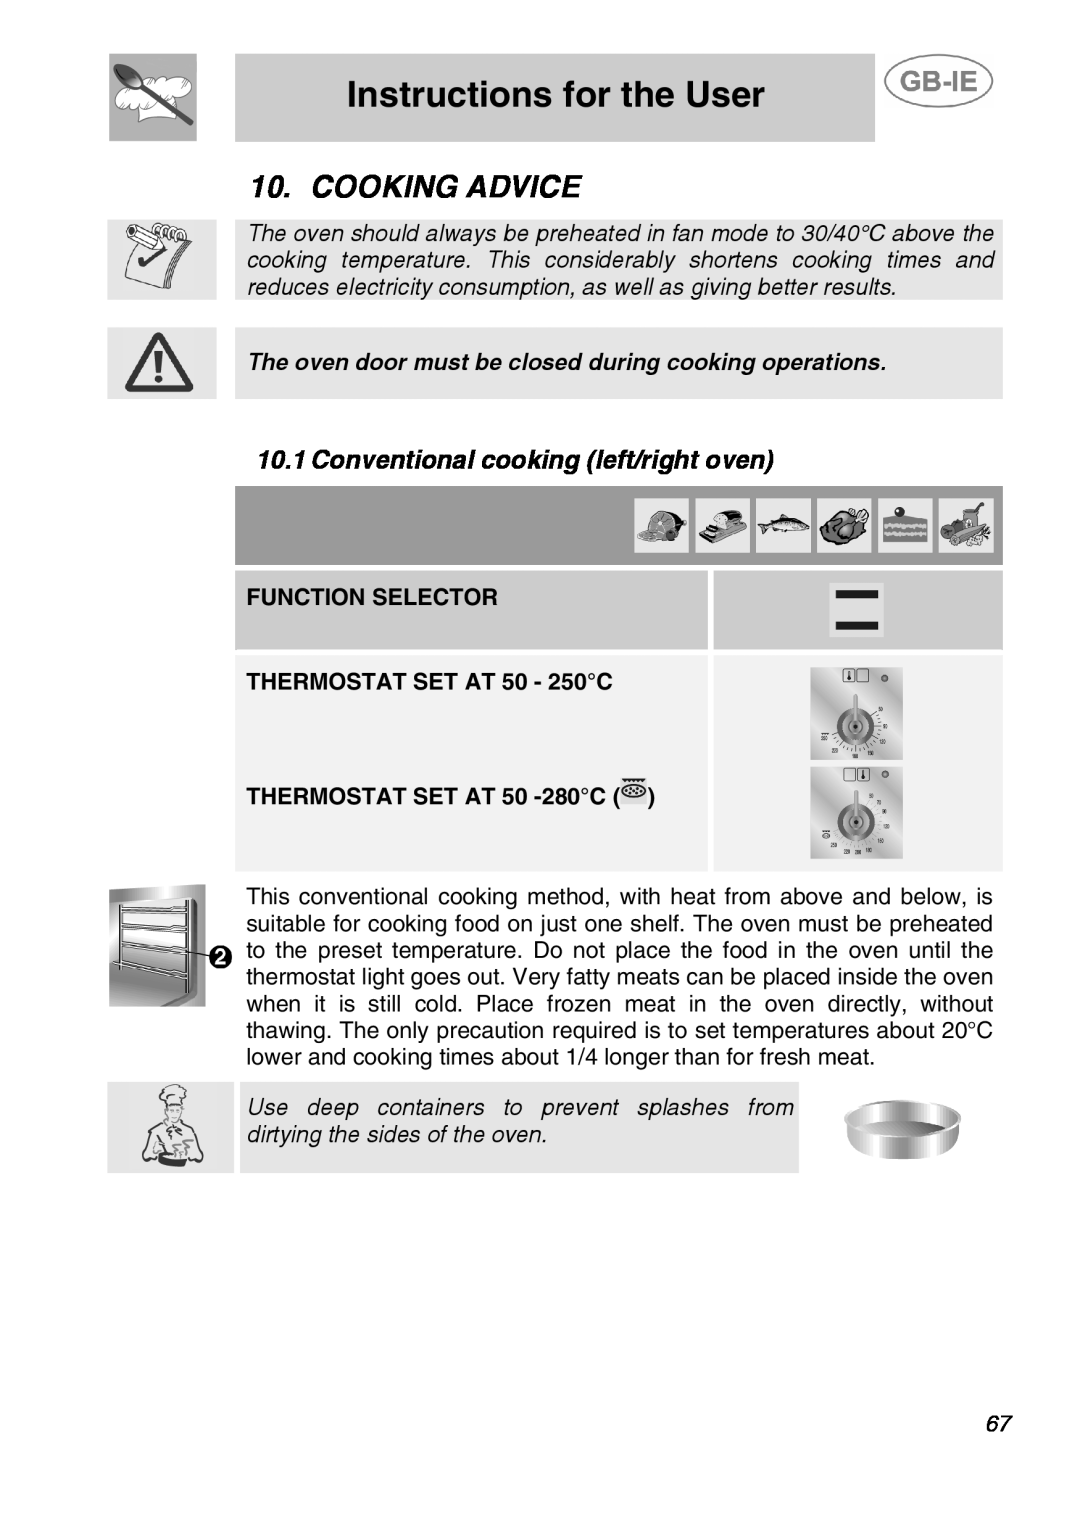 Smeg A5-6 Cooking Advice, Conventional cooking left/right oven, The oven door must be closed during cooking operations 